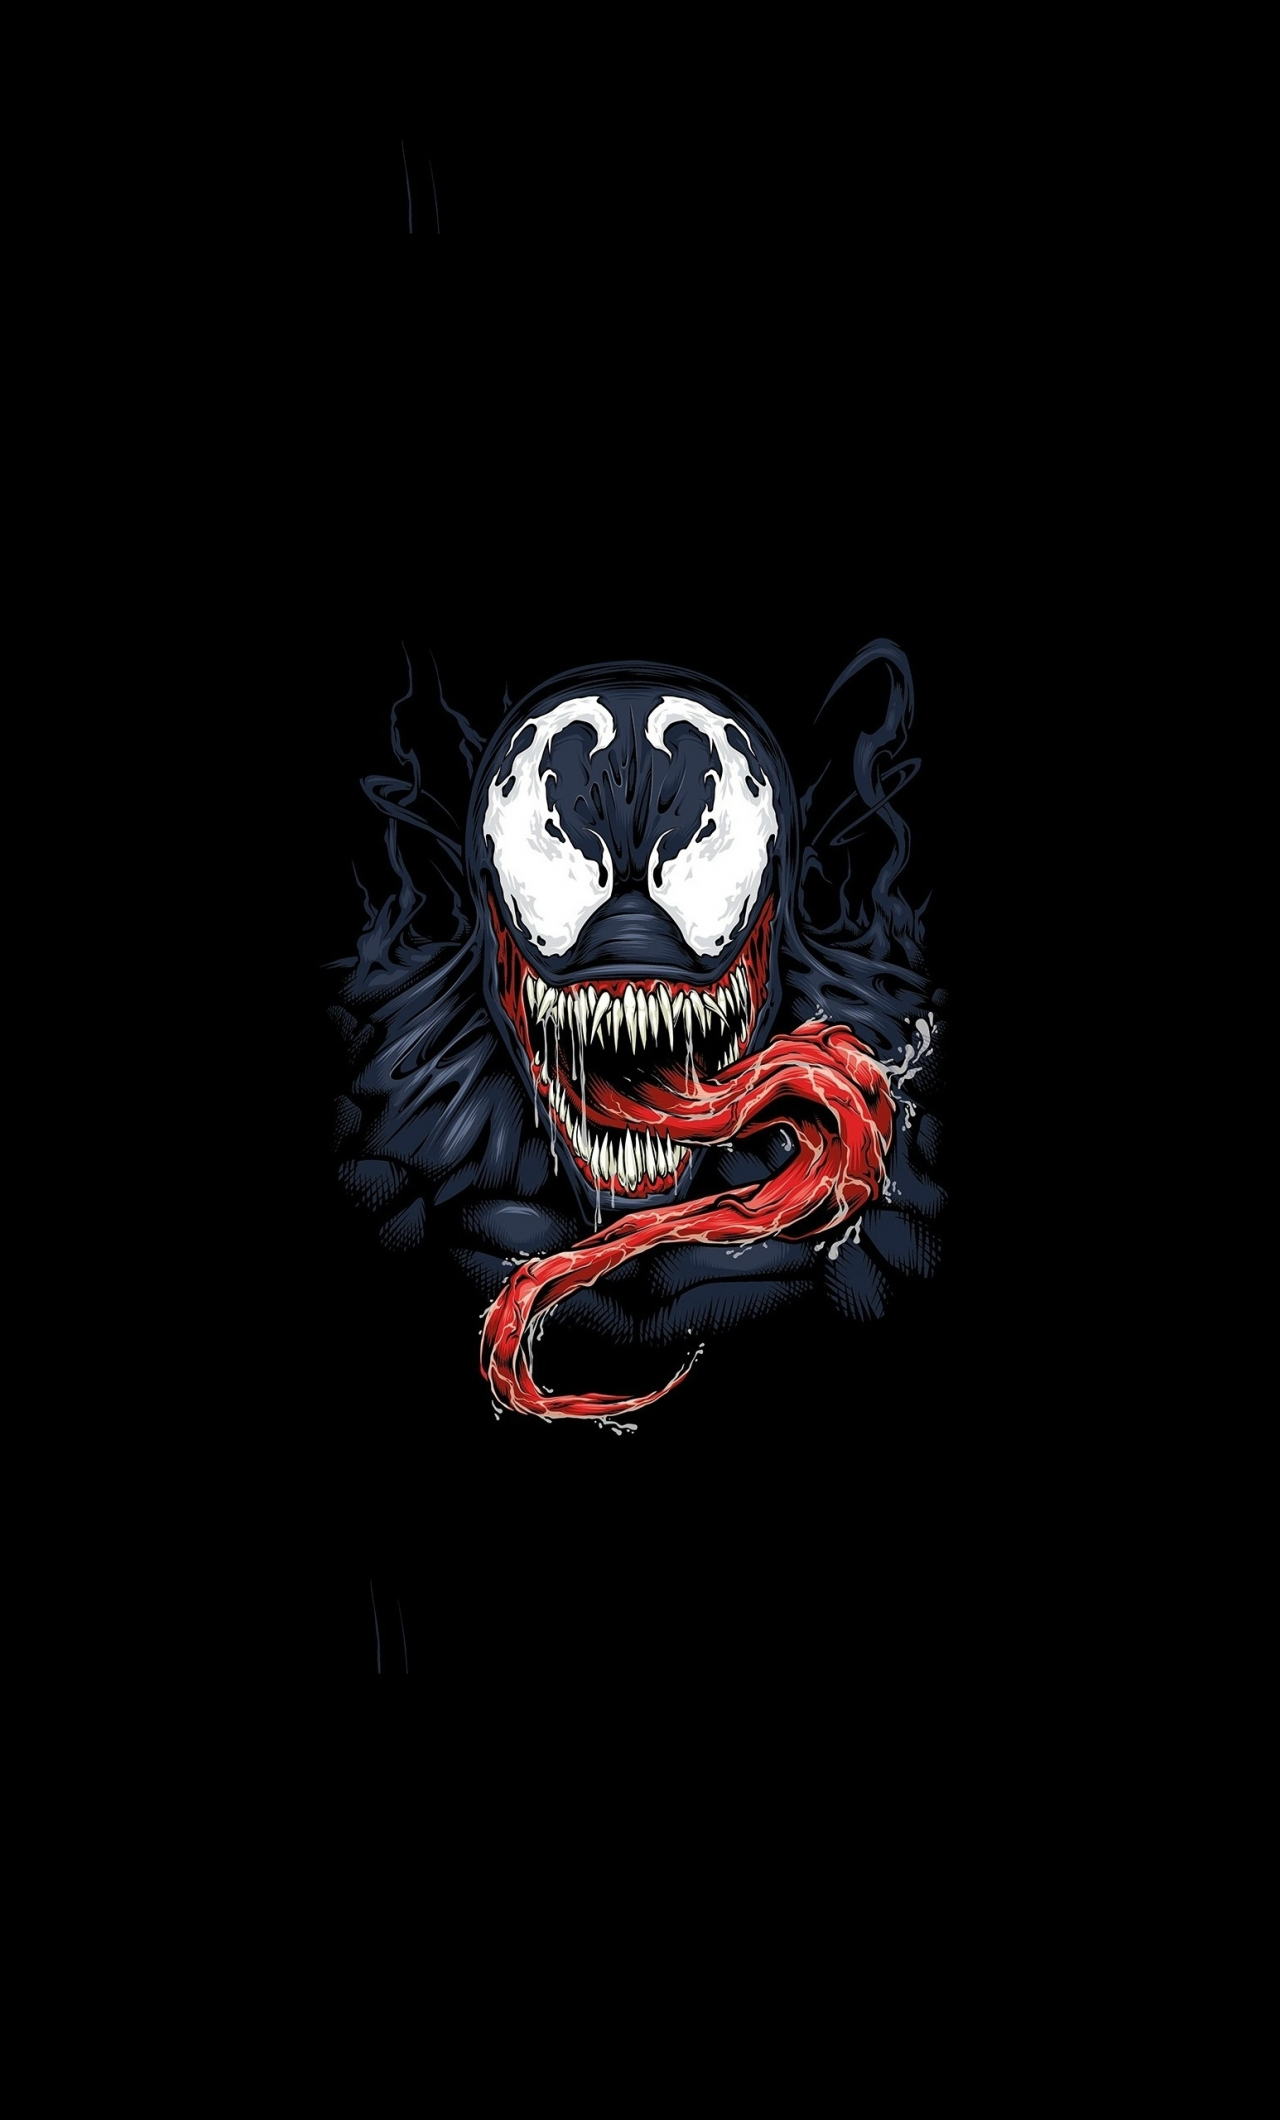 Download Venom unleashes his wrath in the comic world Wallpaper   Wallpaperscom